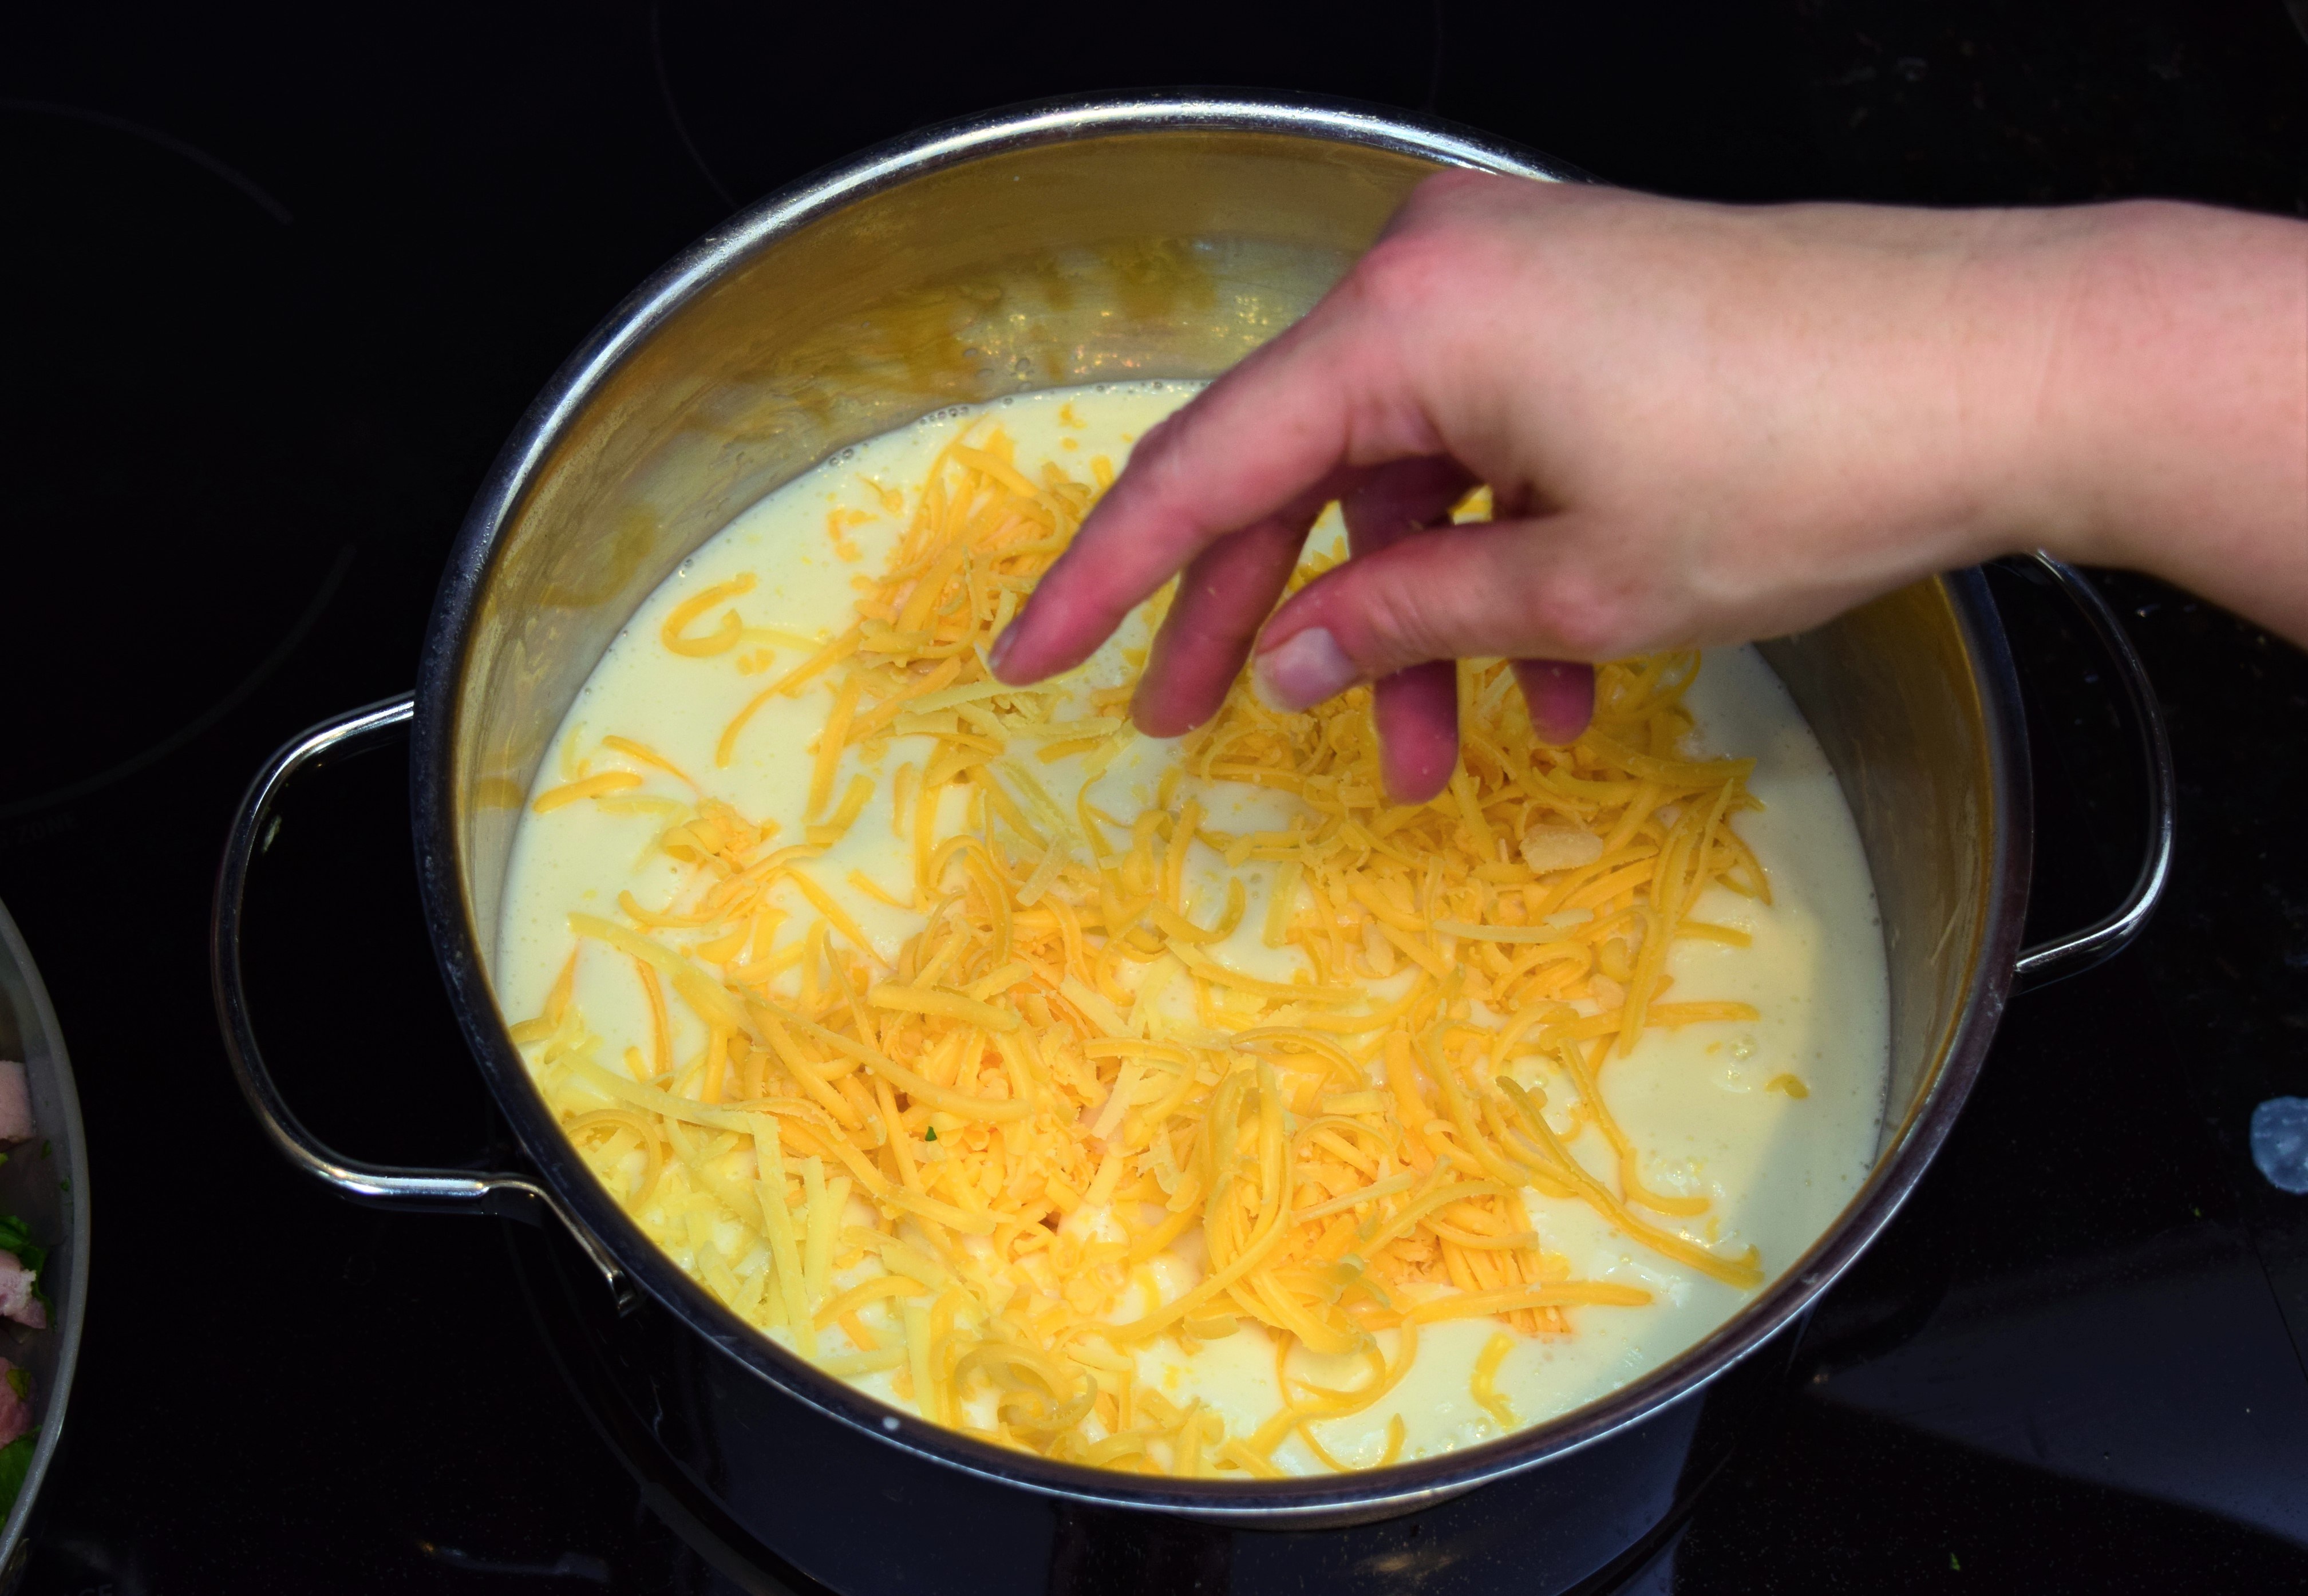 How To Make Cheese Sauce For Mac And Cheese - arever